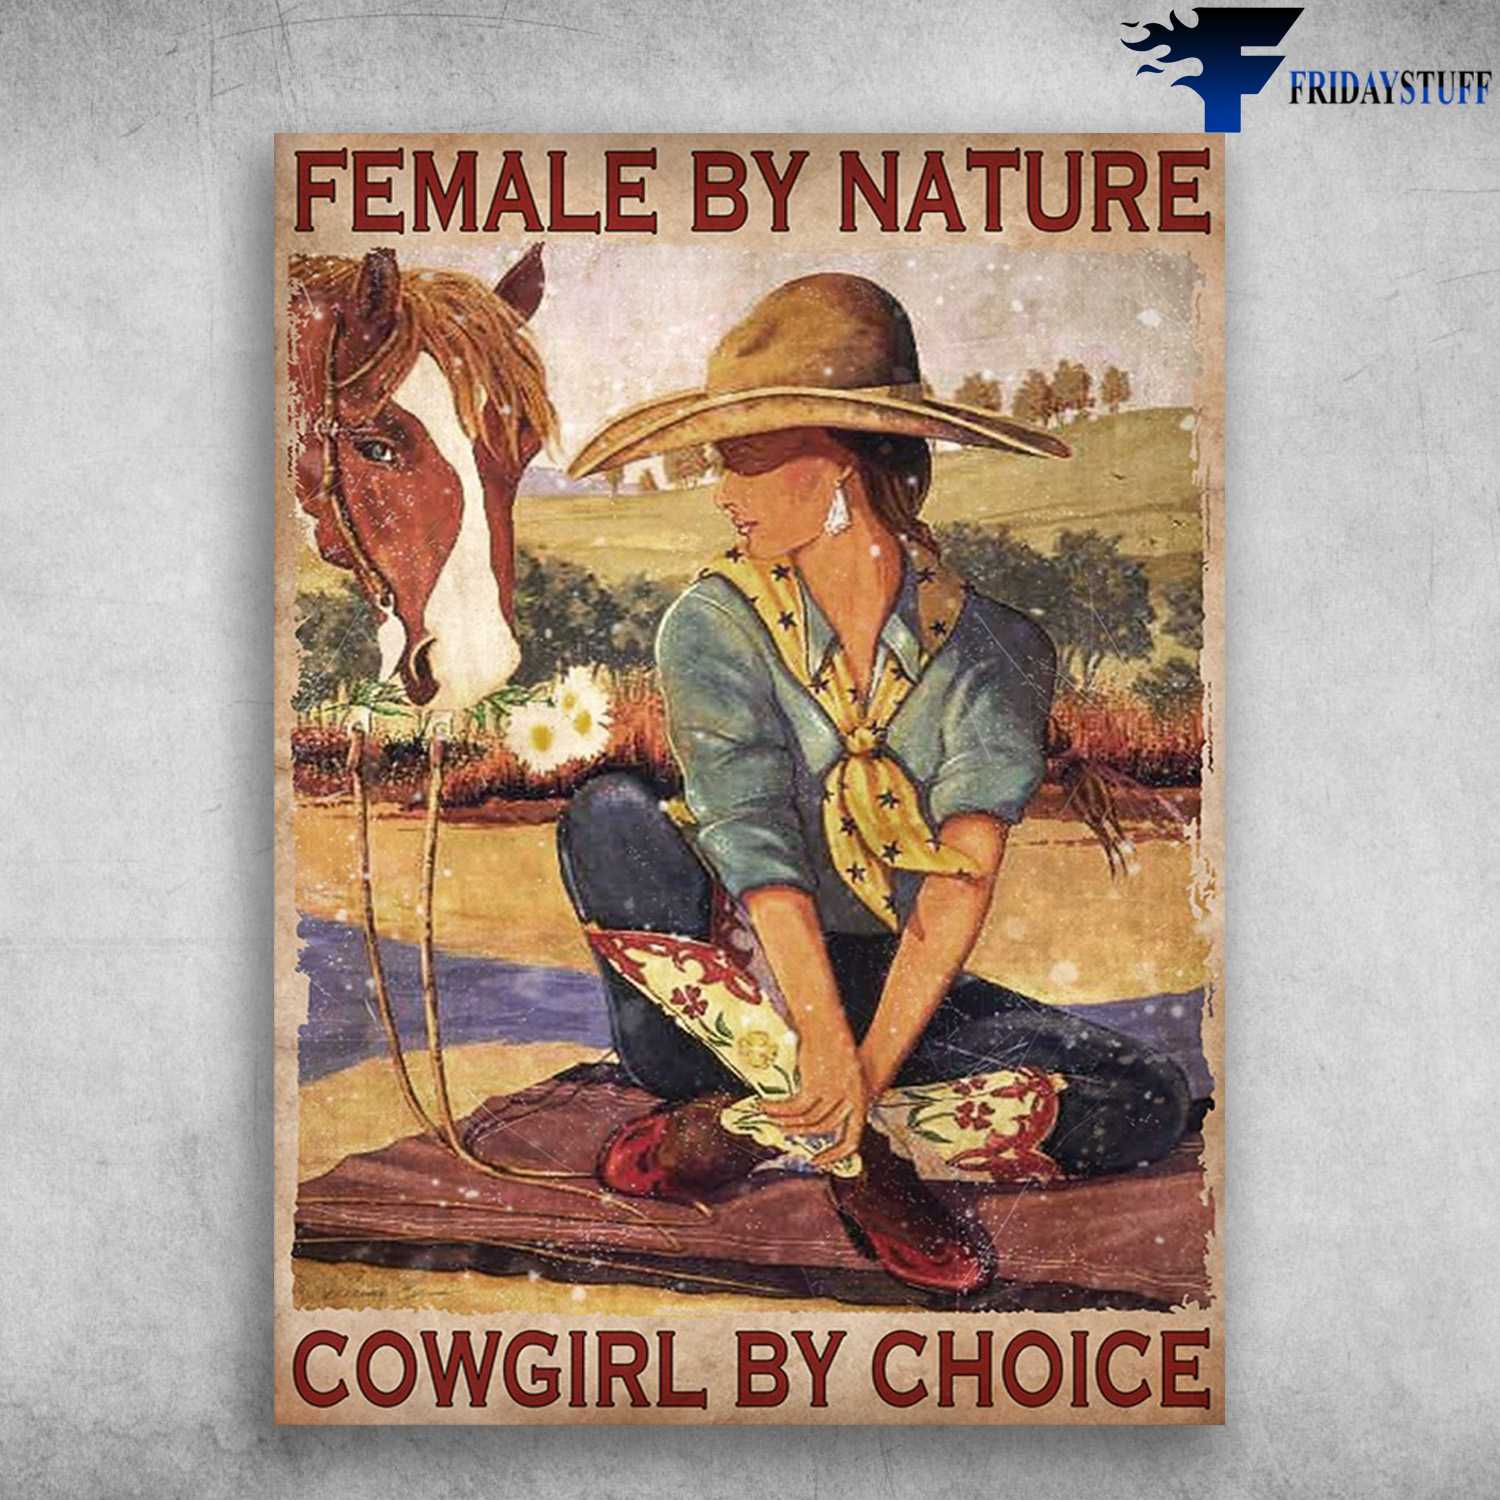 Cowgirl And Horse - Female By Nature, Cowgirl By Choice